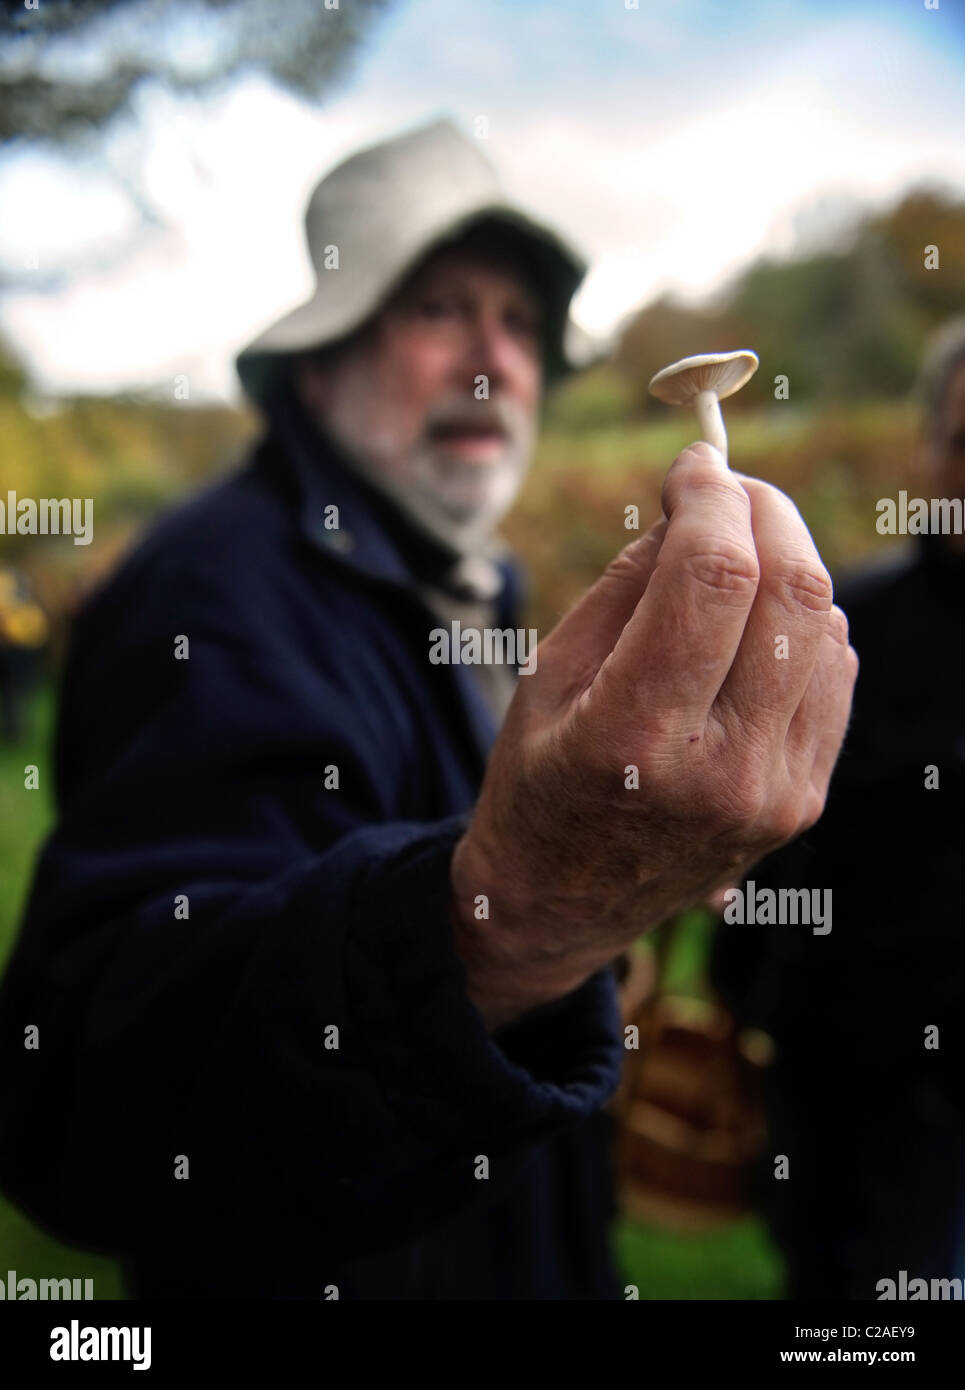 Foraging expert Raoul Van Den Broucke displays the deadly poisonous mushroom Clitocybe Dealbata or Ivory Funnel during a field t Stock Photo